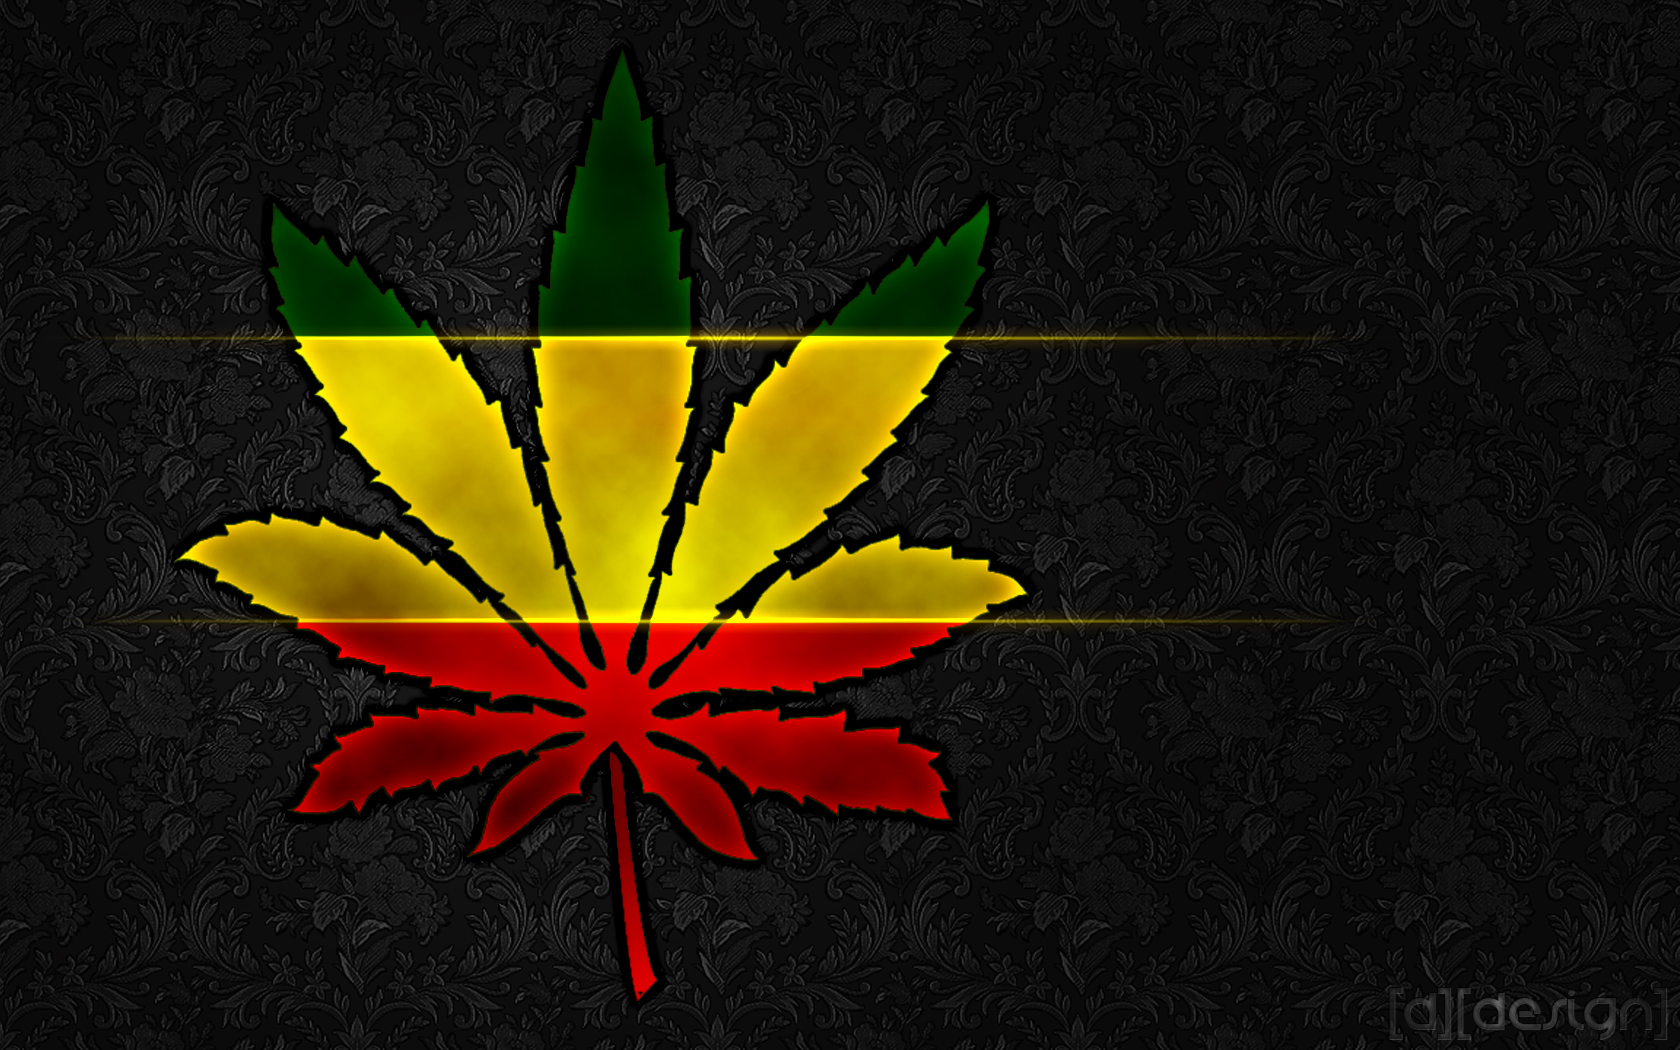 Weed Desktop and mobile wallpaper Wallippo